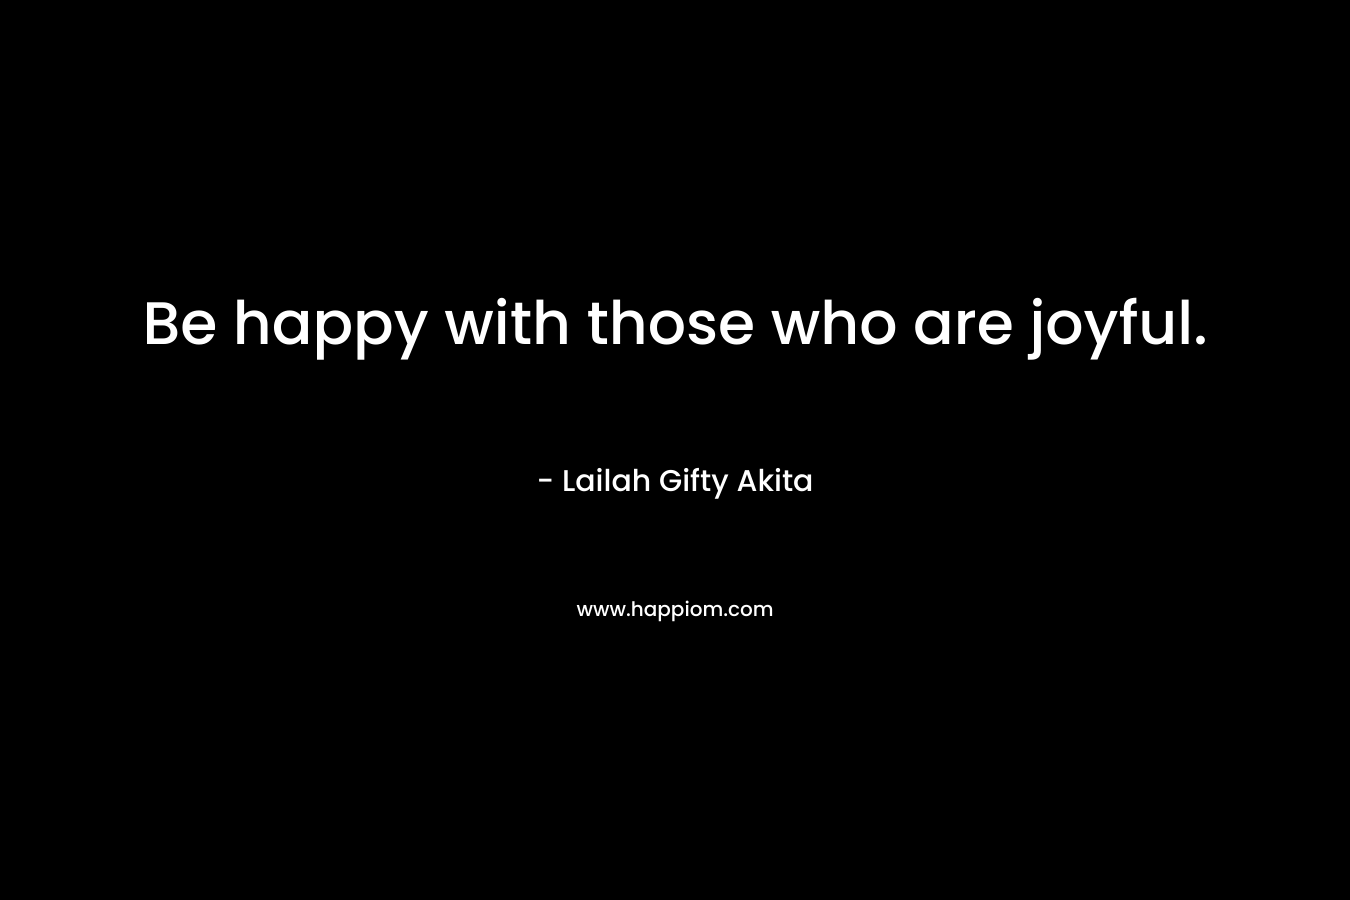 Be happy with those who are joyful.